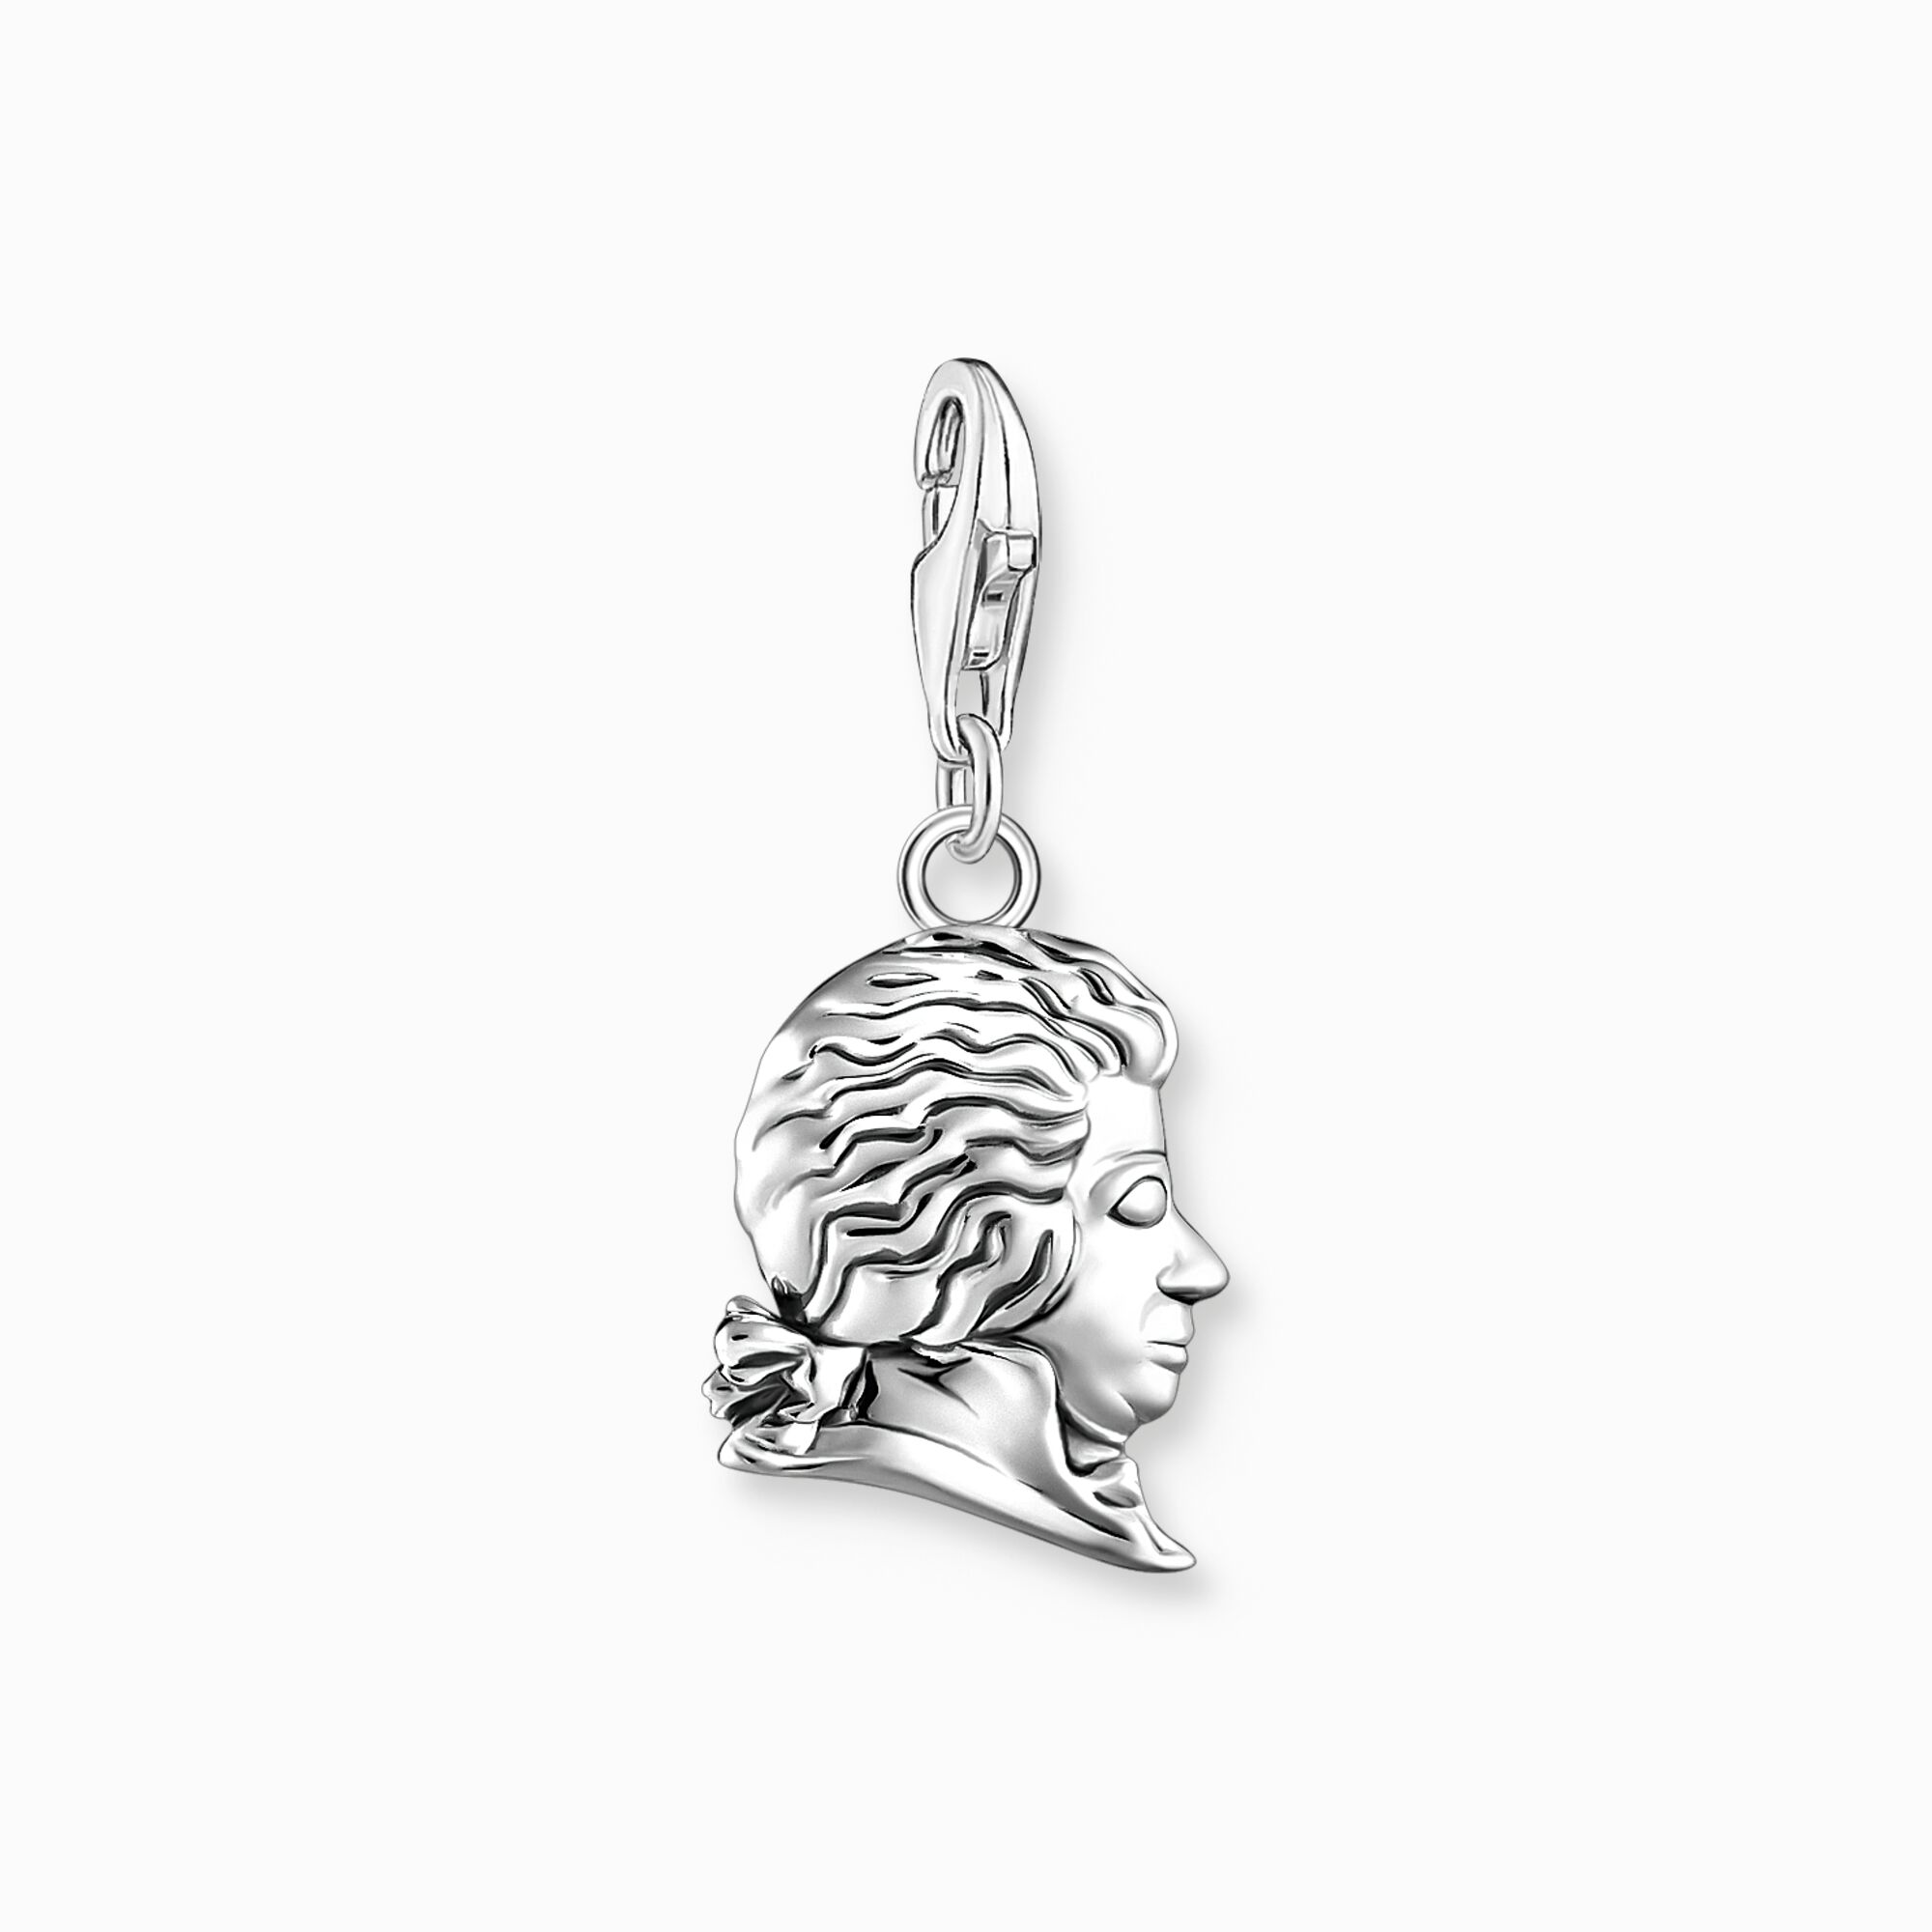 Charm pendant Mozart silver from the Charm Club collection in the THOMAS SABO online store